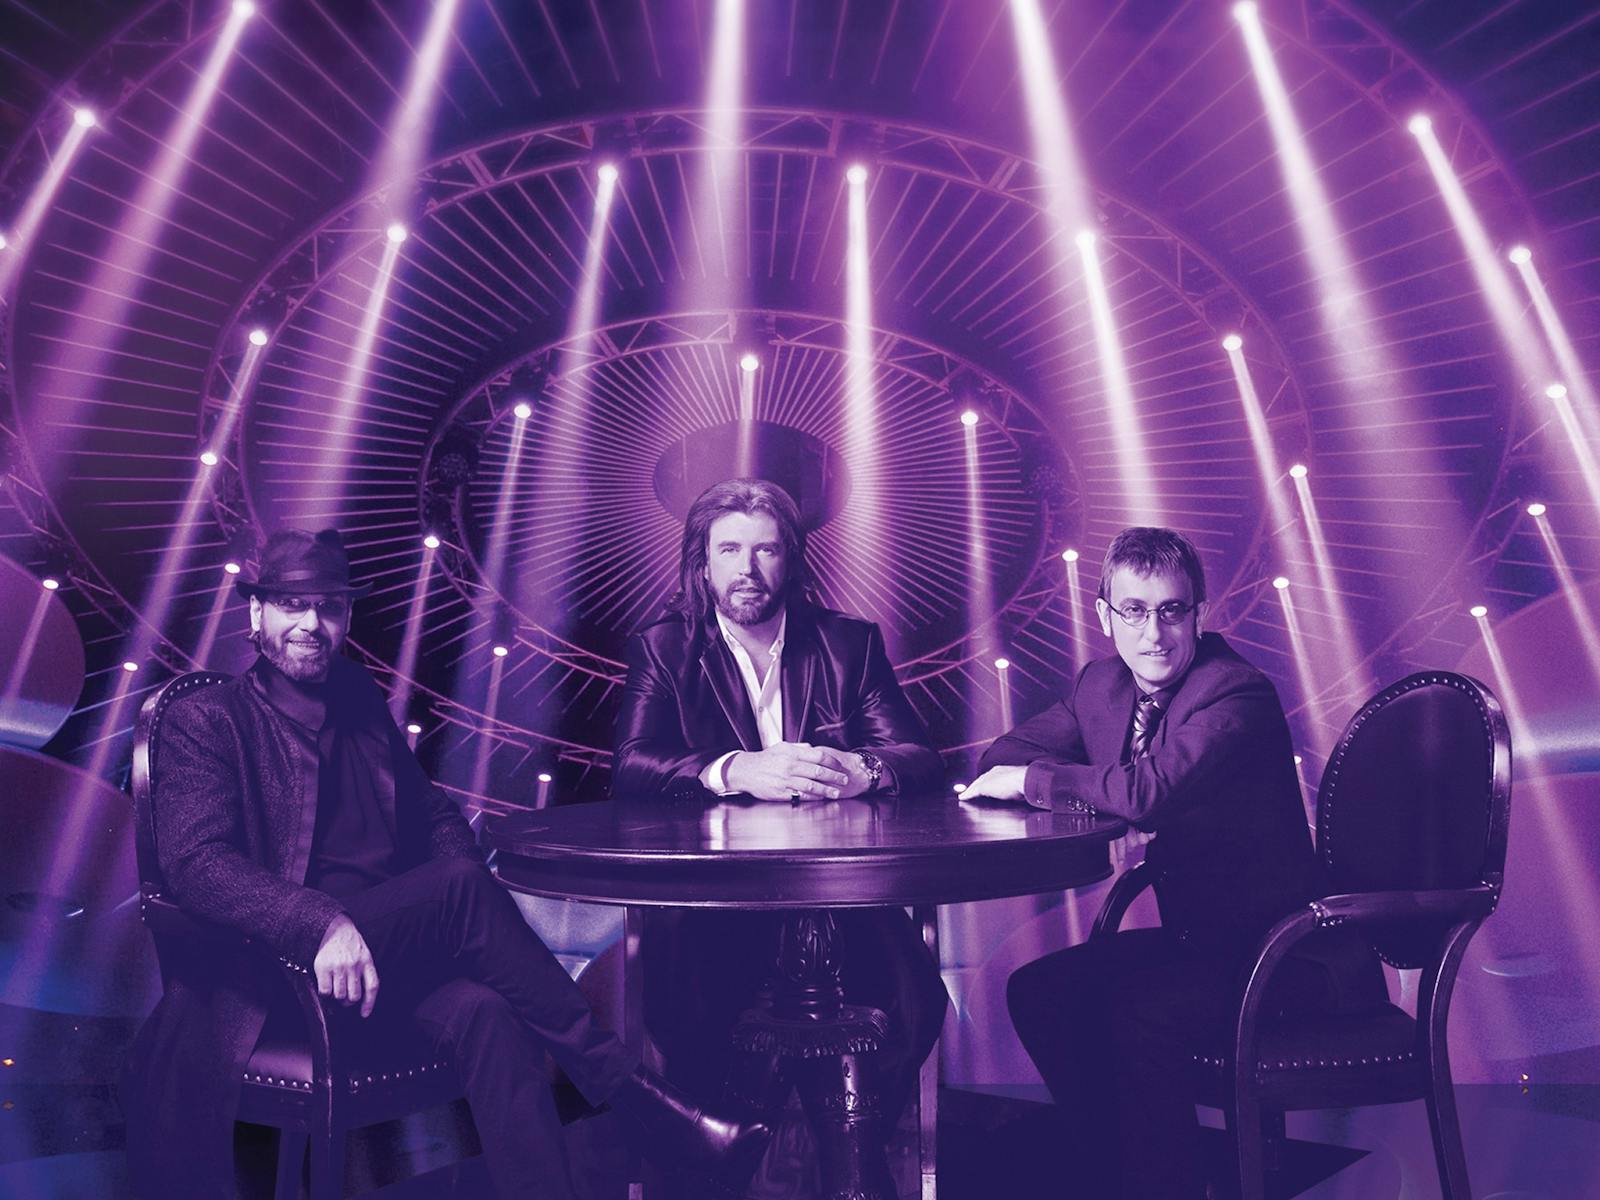 Image for The Australian Bee Gees Show - 25th Anniversary Tour - Bunbury